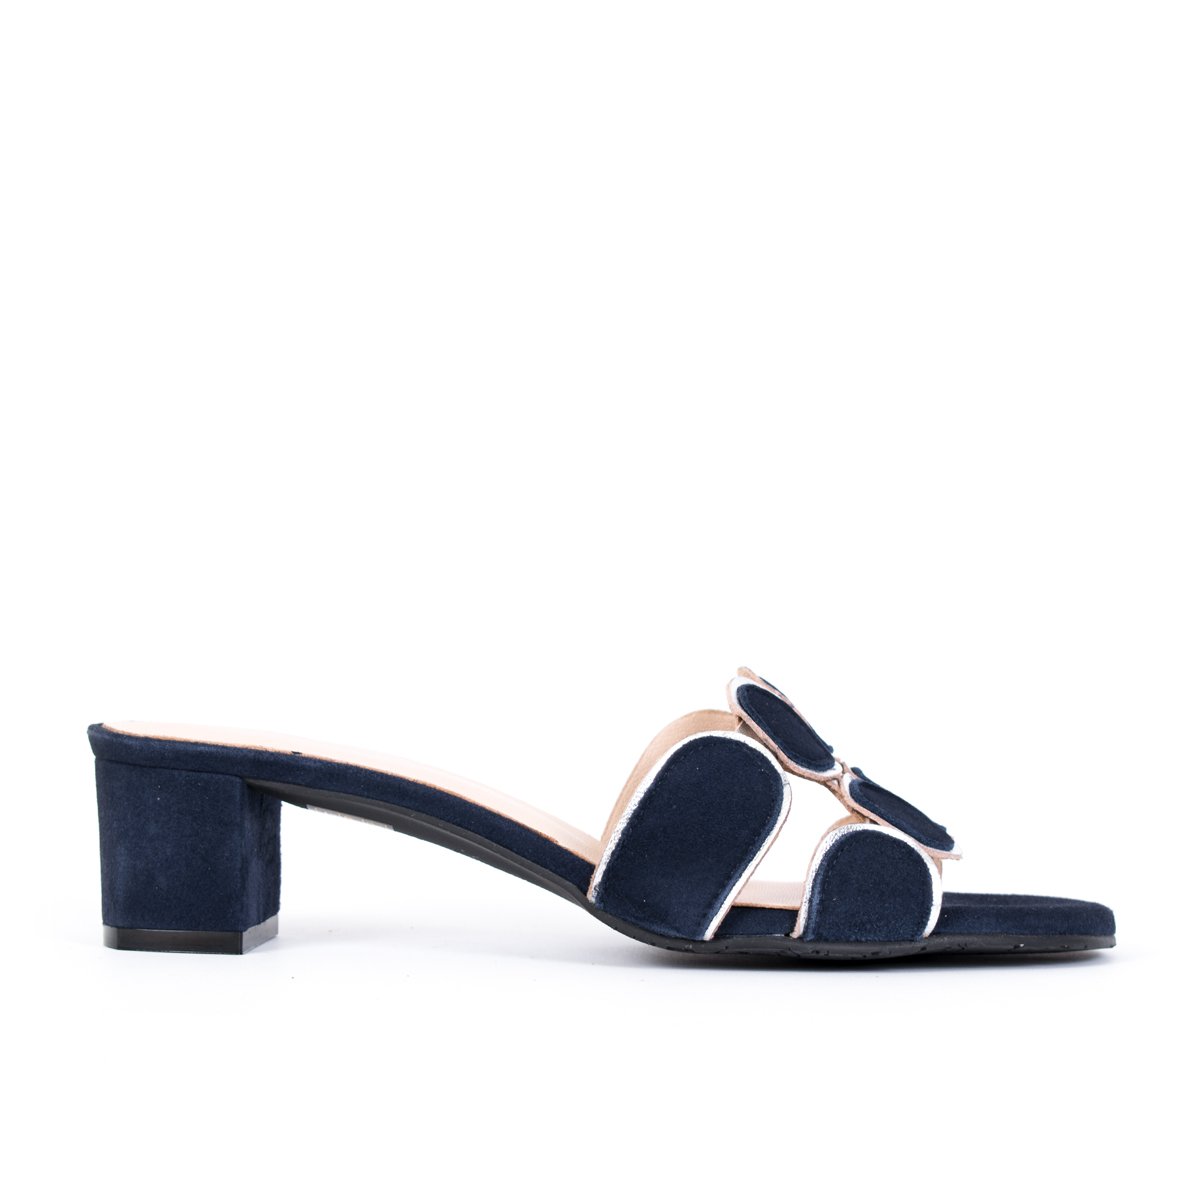 Brenda Zaro T3113 Navy Suede Sandal| Ooh Ooh Shoes woman's clothing & shoe boutique naples, charleston and mashpee